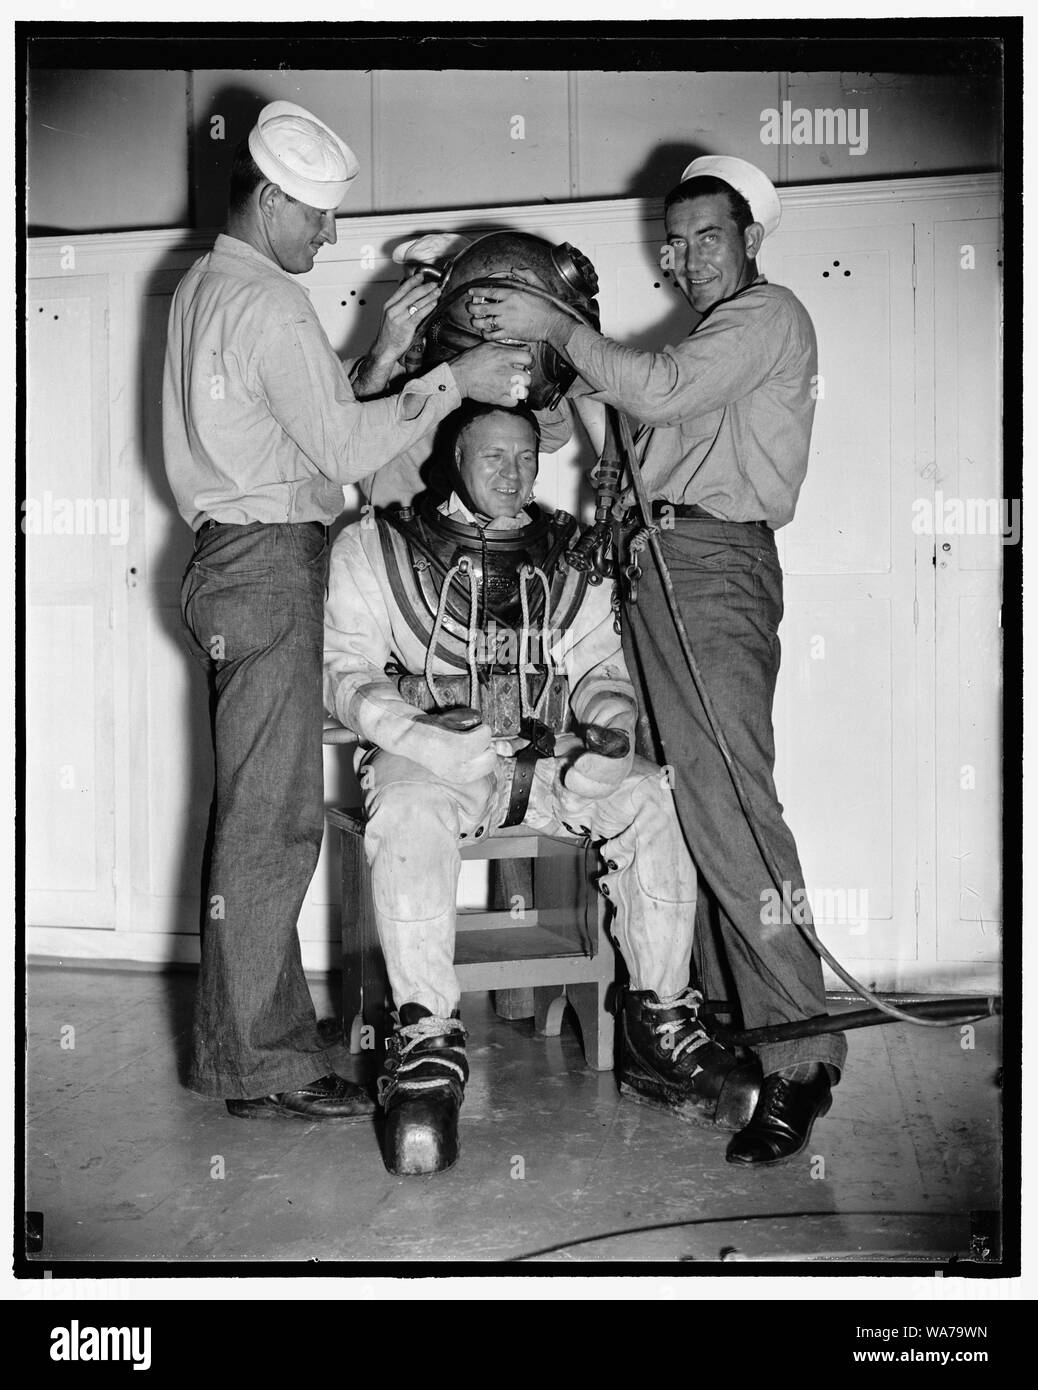 Add record depth reached by Navy divers. William Badders, Master Diver, U.S.N., who recently made a record dive of over 500 feet, is helped into his underwater suit just before taking an experimental dive in the tank at Washington Navy Yard, 8/9/38 Stock Photo